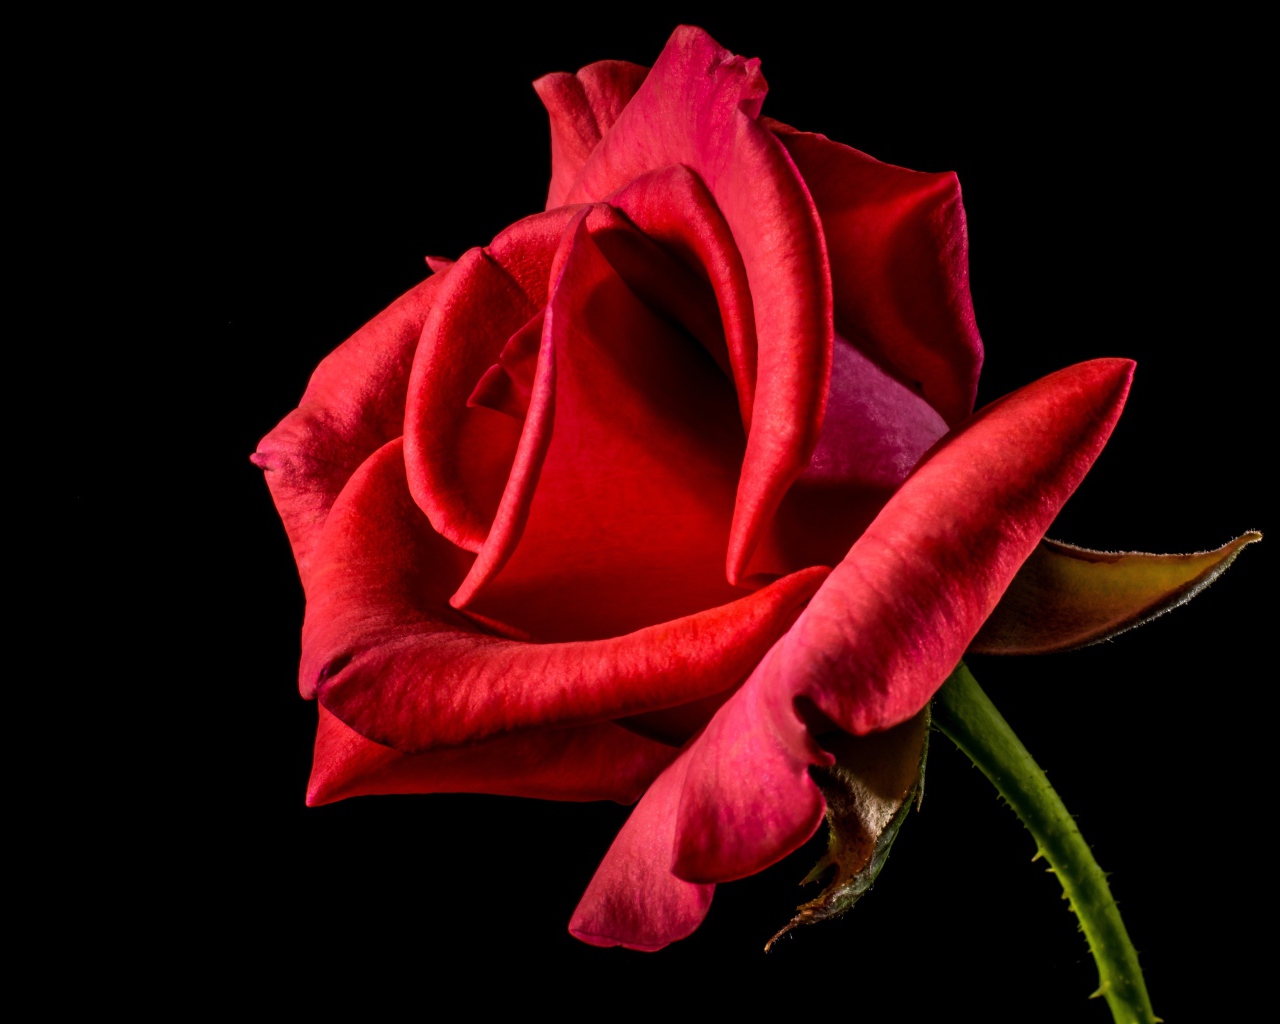 Red rose with delicate petals on a black background